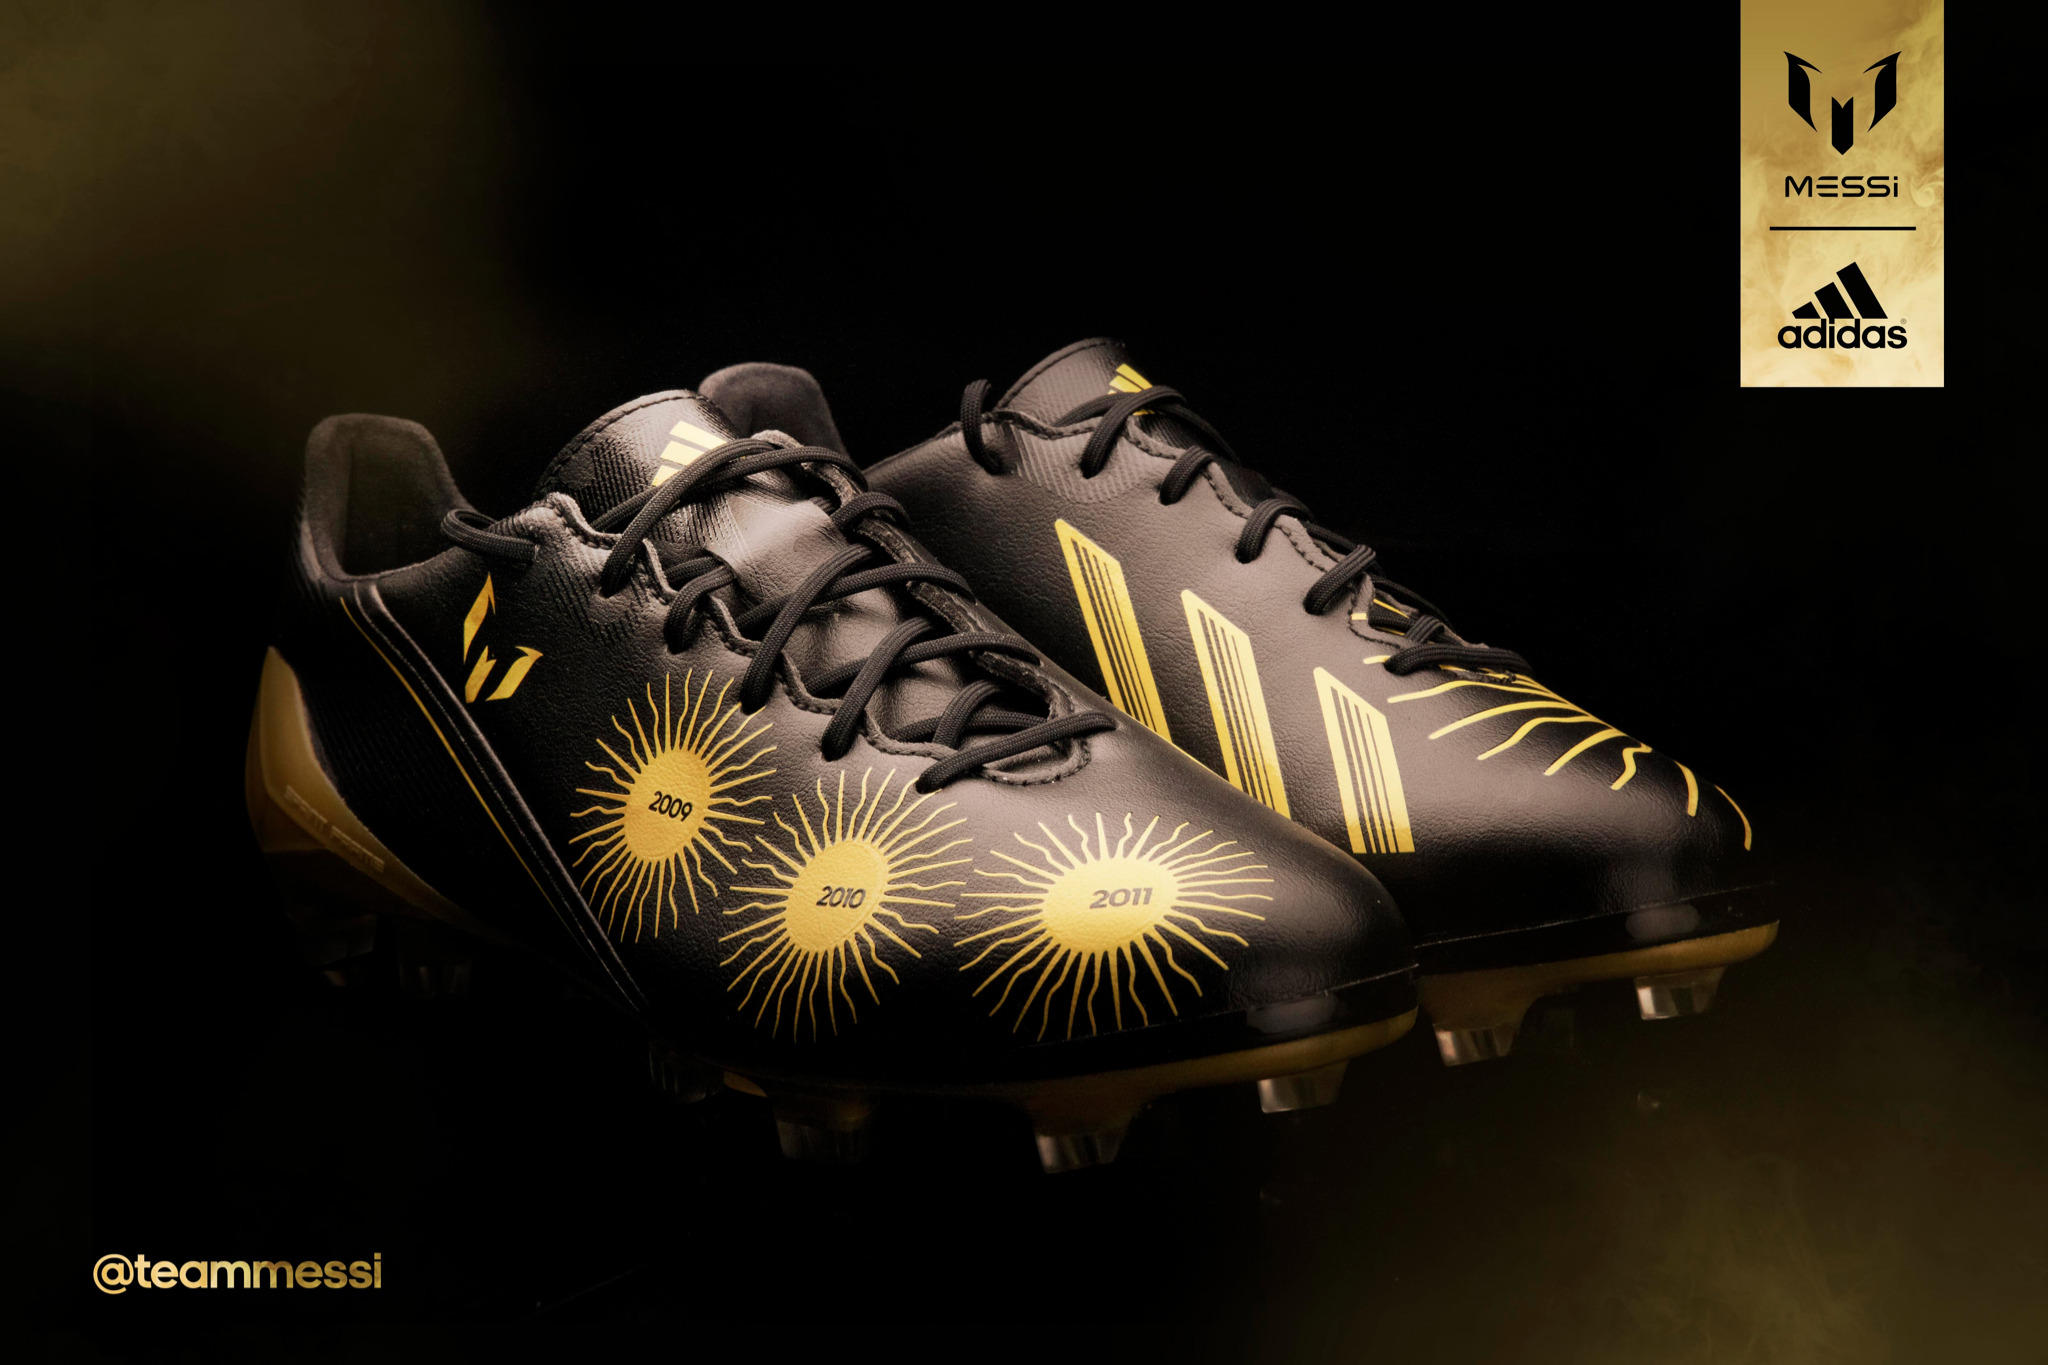 Team on Twitter: "Here are Leo's d'Or adizero f50's from another angle! Follow @TeamMessi and RT for a chance to win. #Messi http://t.co/verKPgUb" / Twitter